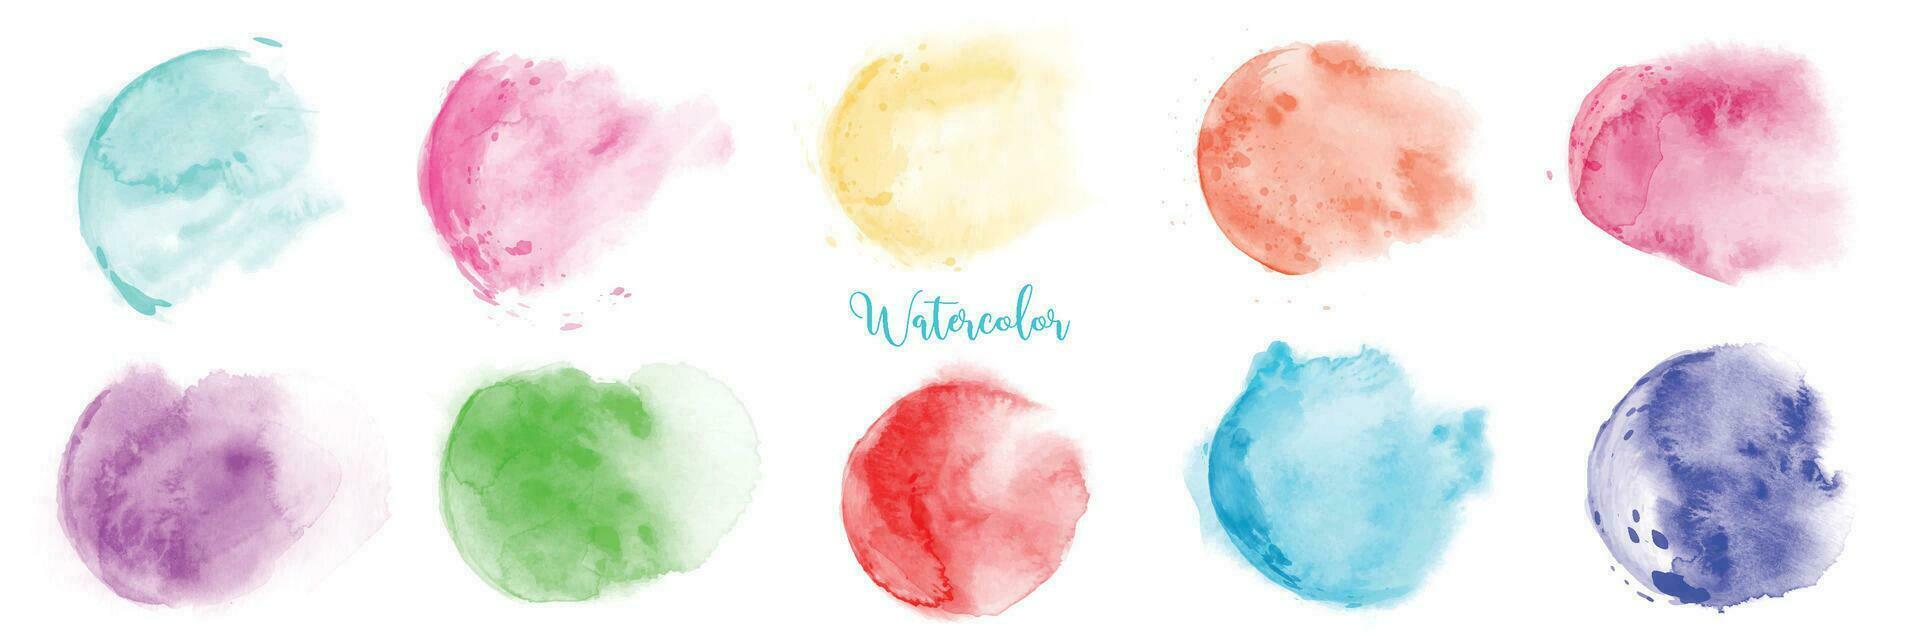 Hand painted rainbow stain watercolor brush set vector